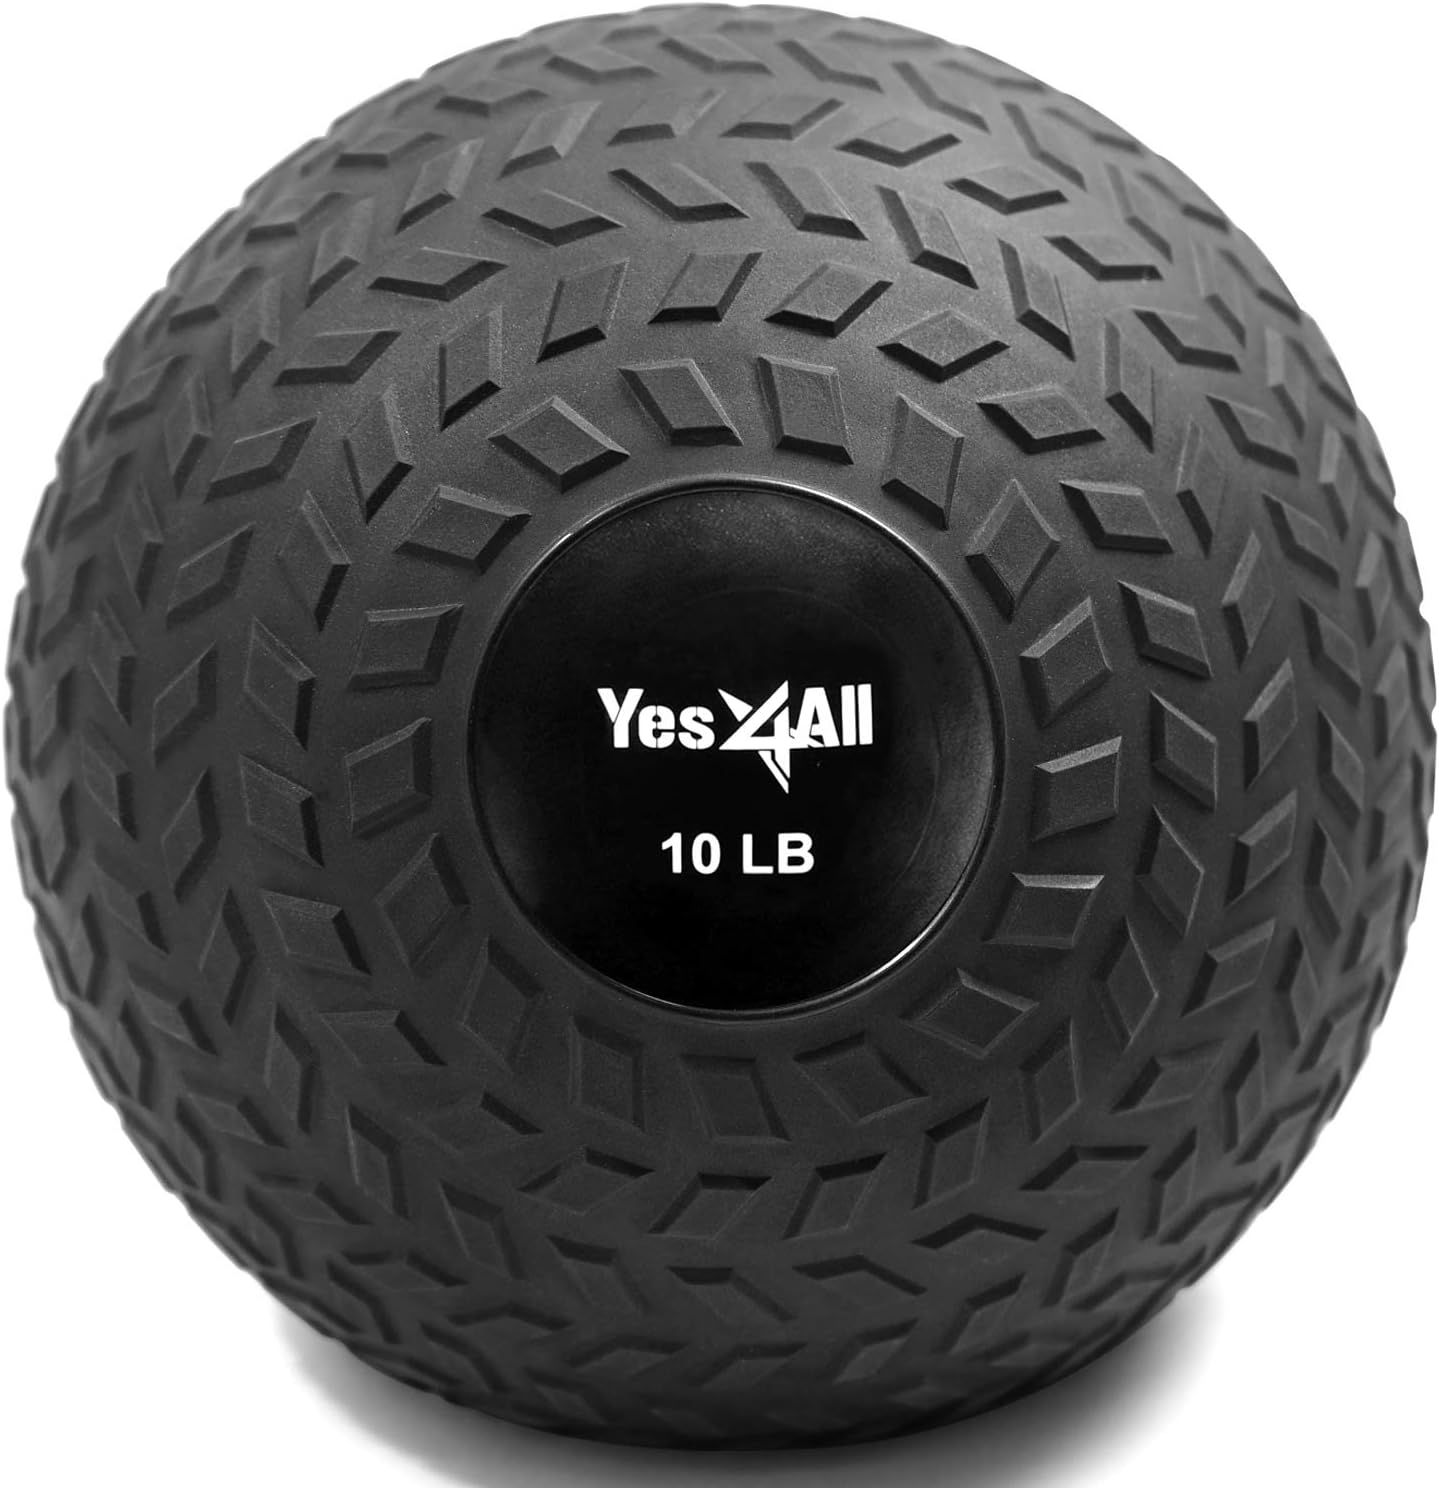 Yes4All Slam Balls (Black, Blue, Teal, Orange & Glossy) 10-40lbs for Strength and Crossfit Workou... | Amazon (US)